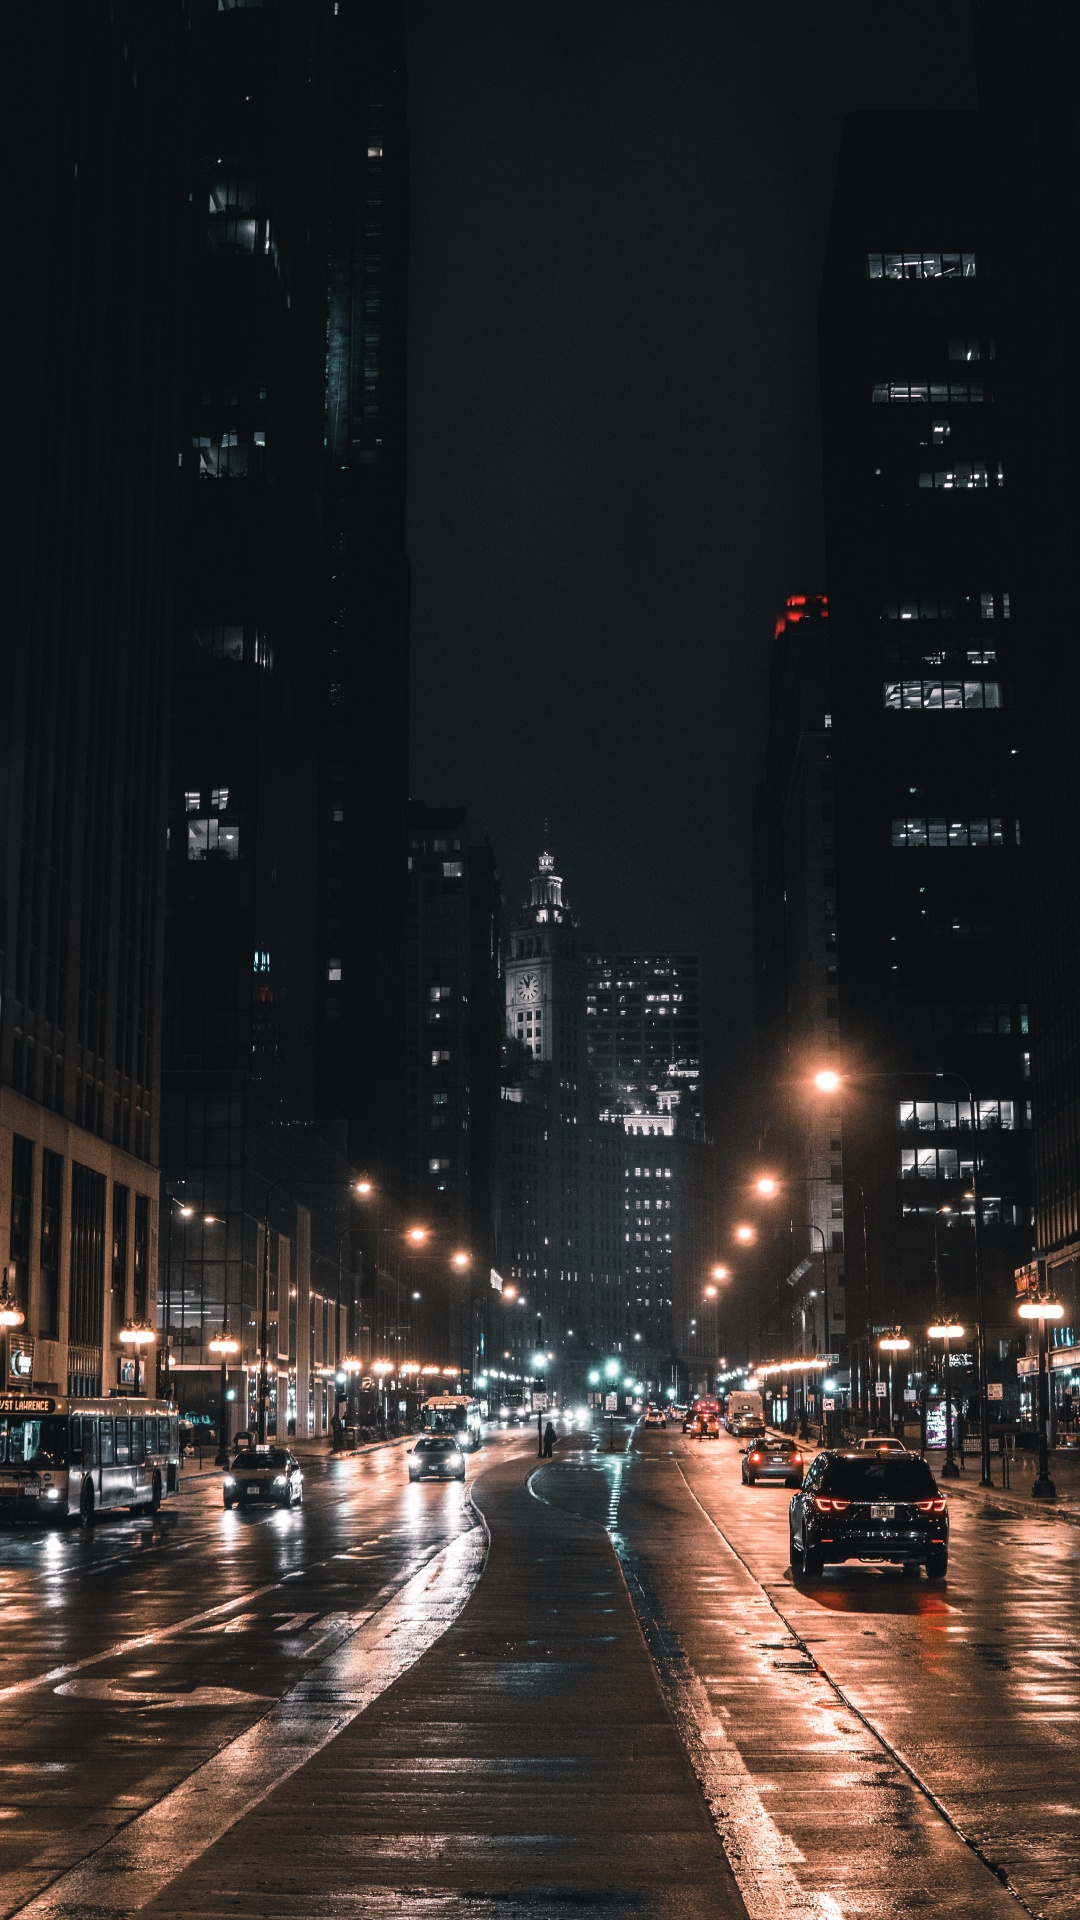 Cars on Road During Night Time. Wallpaper in 1080x1920 Resolution